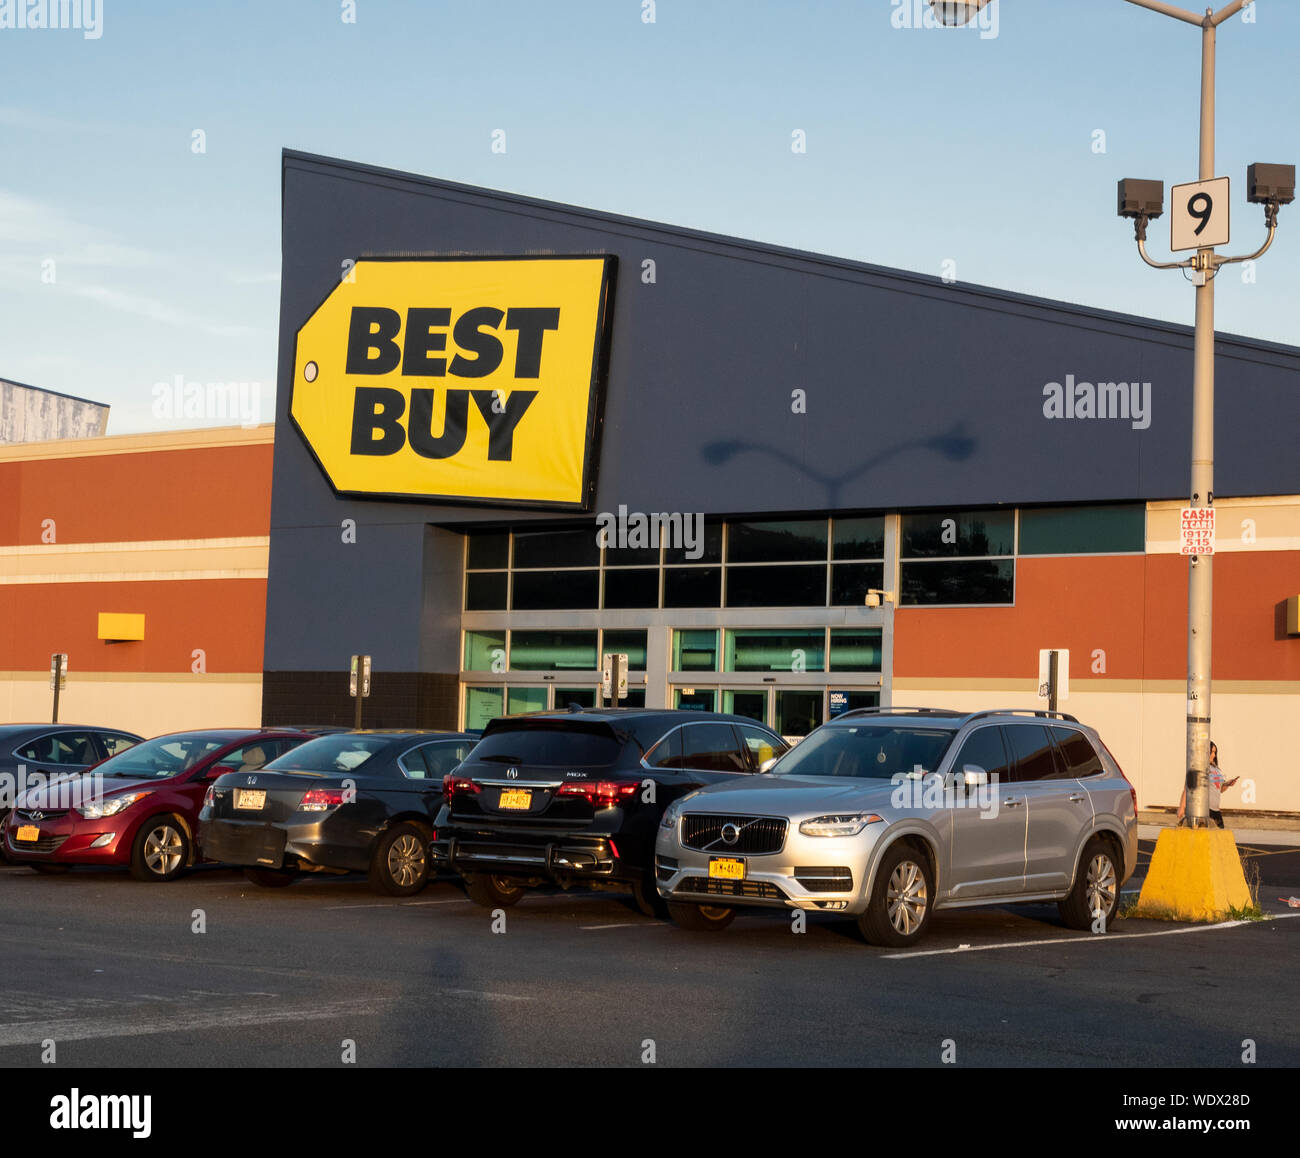 https://c8.alamy.com/comp/WDX28D/brooklyn-ny-usa-august-12-2019-exterior-of-best-buy-an-american-multinational-consumer-electronics-retailer-selling-electronics-computers-a-WDX28D.jpg